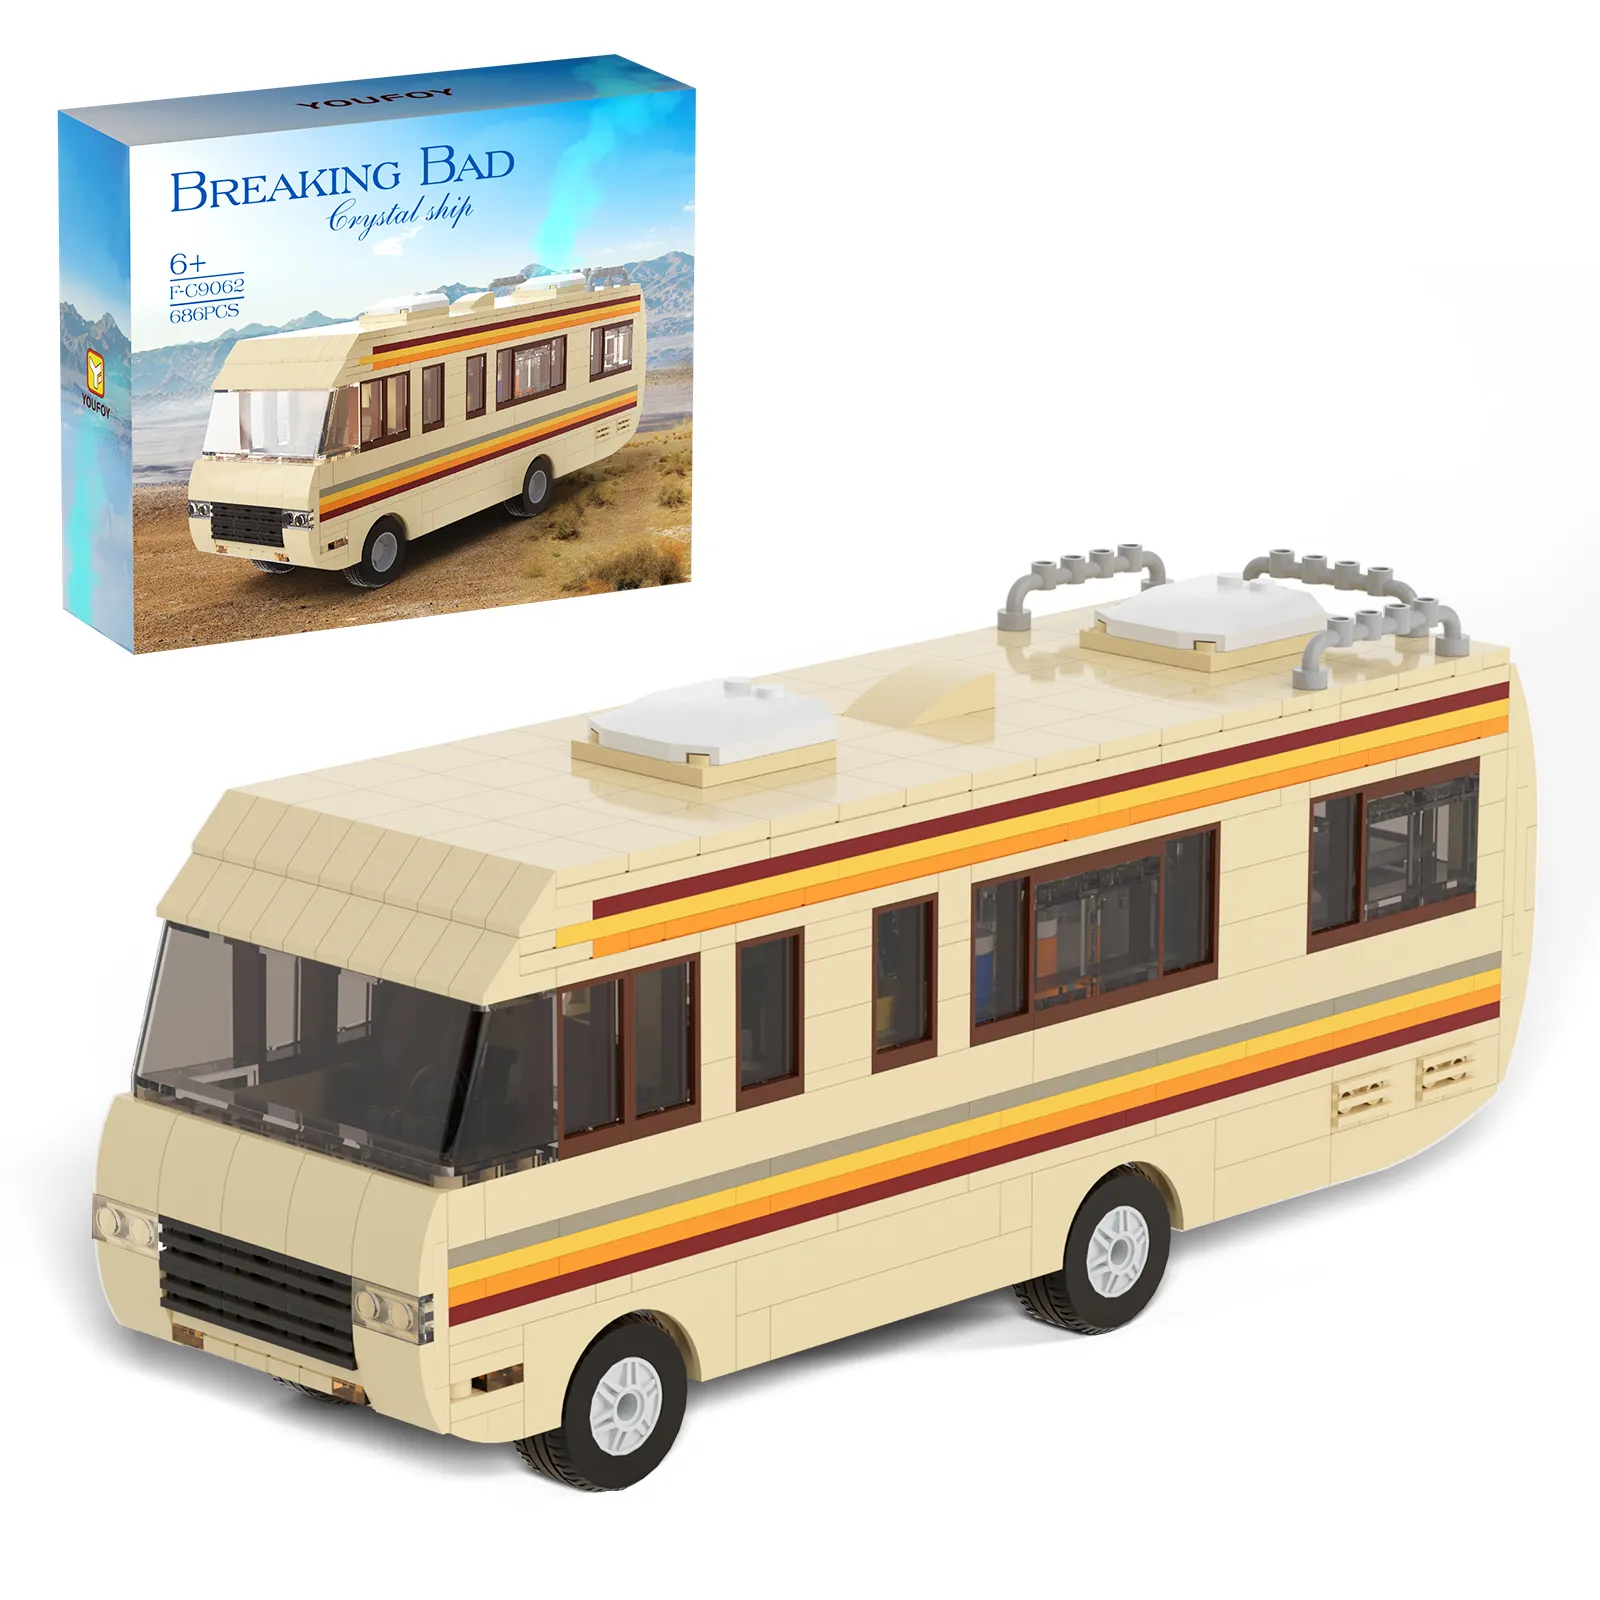 BuildMoc Movie Breaking Bad Walter White And Pinkman Cooking Lab RV Car Building Blocks Kit Vehicle Van Toys For Children Gifts